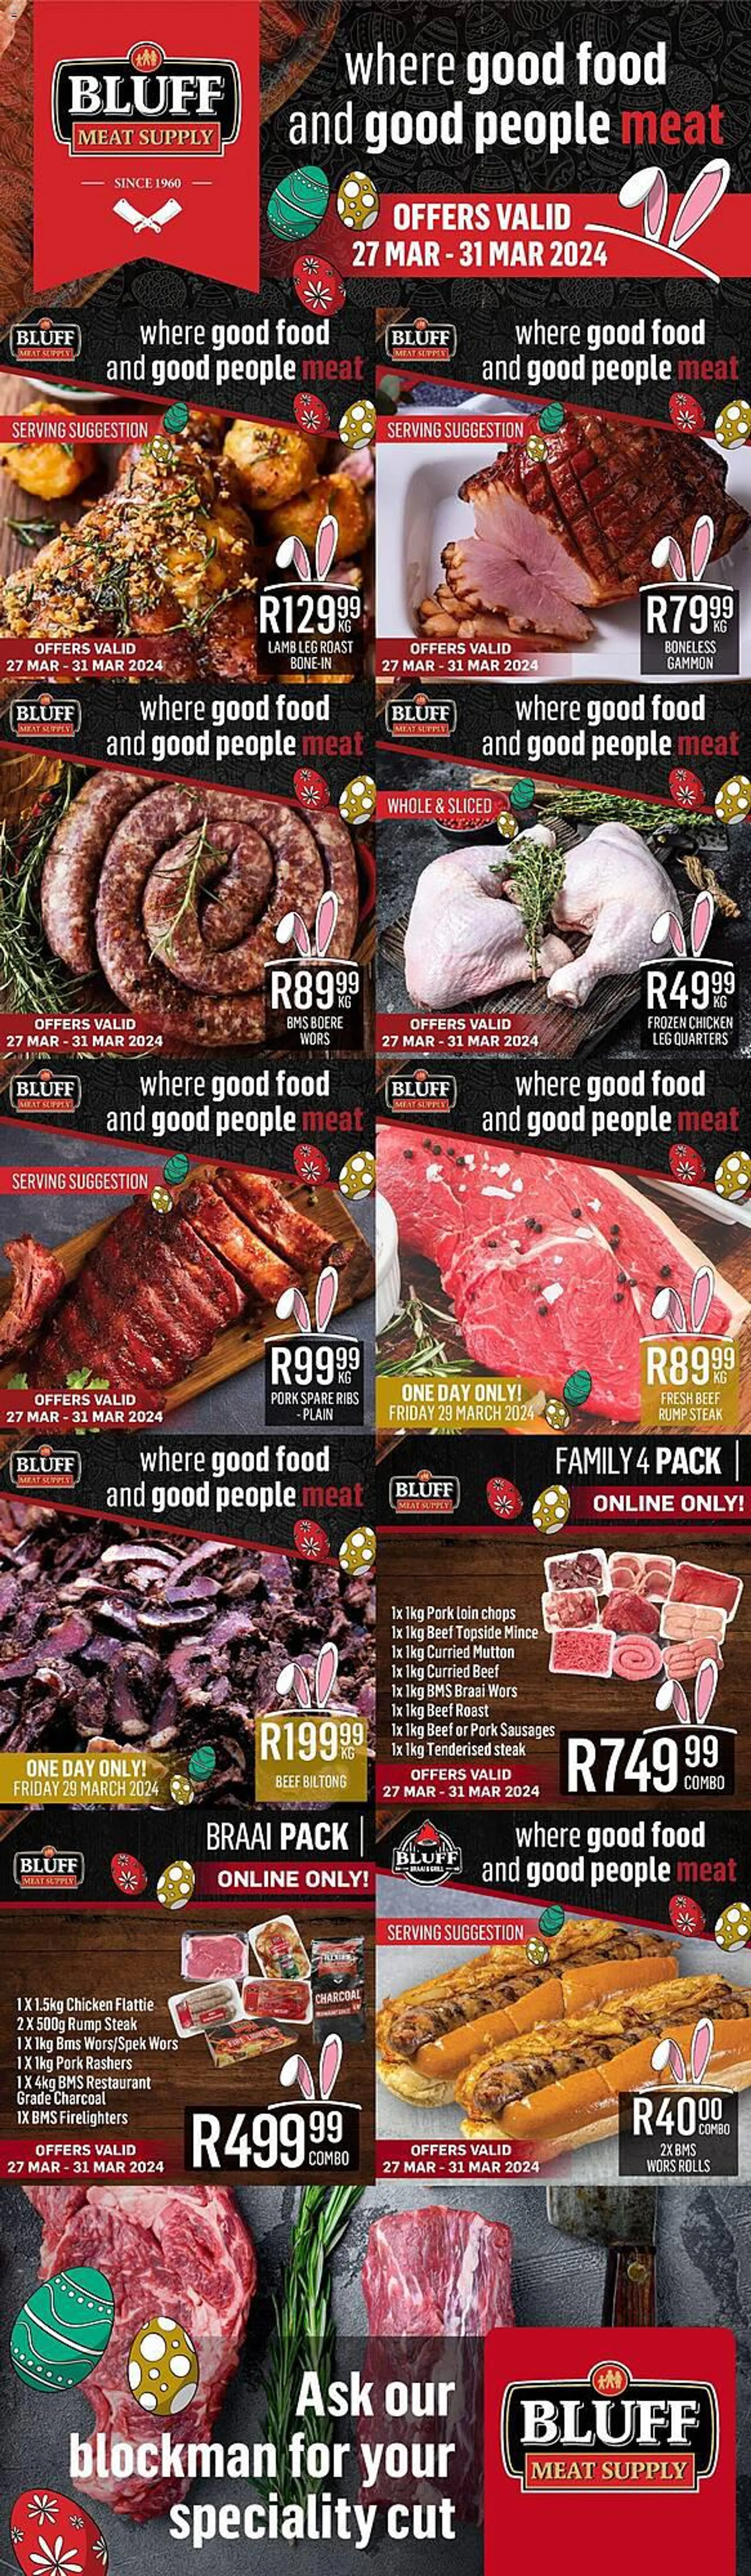 Bluff Meat Supply catalogue - 27 March 31 March 2024 - Page 1